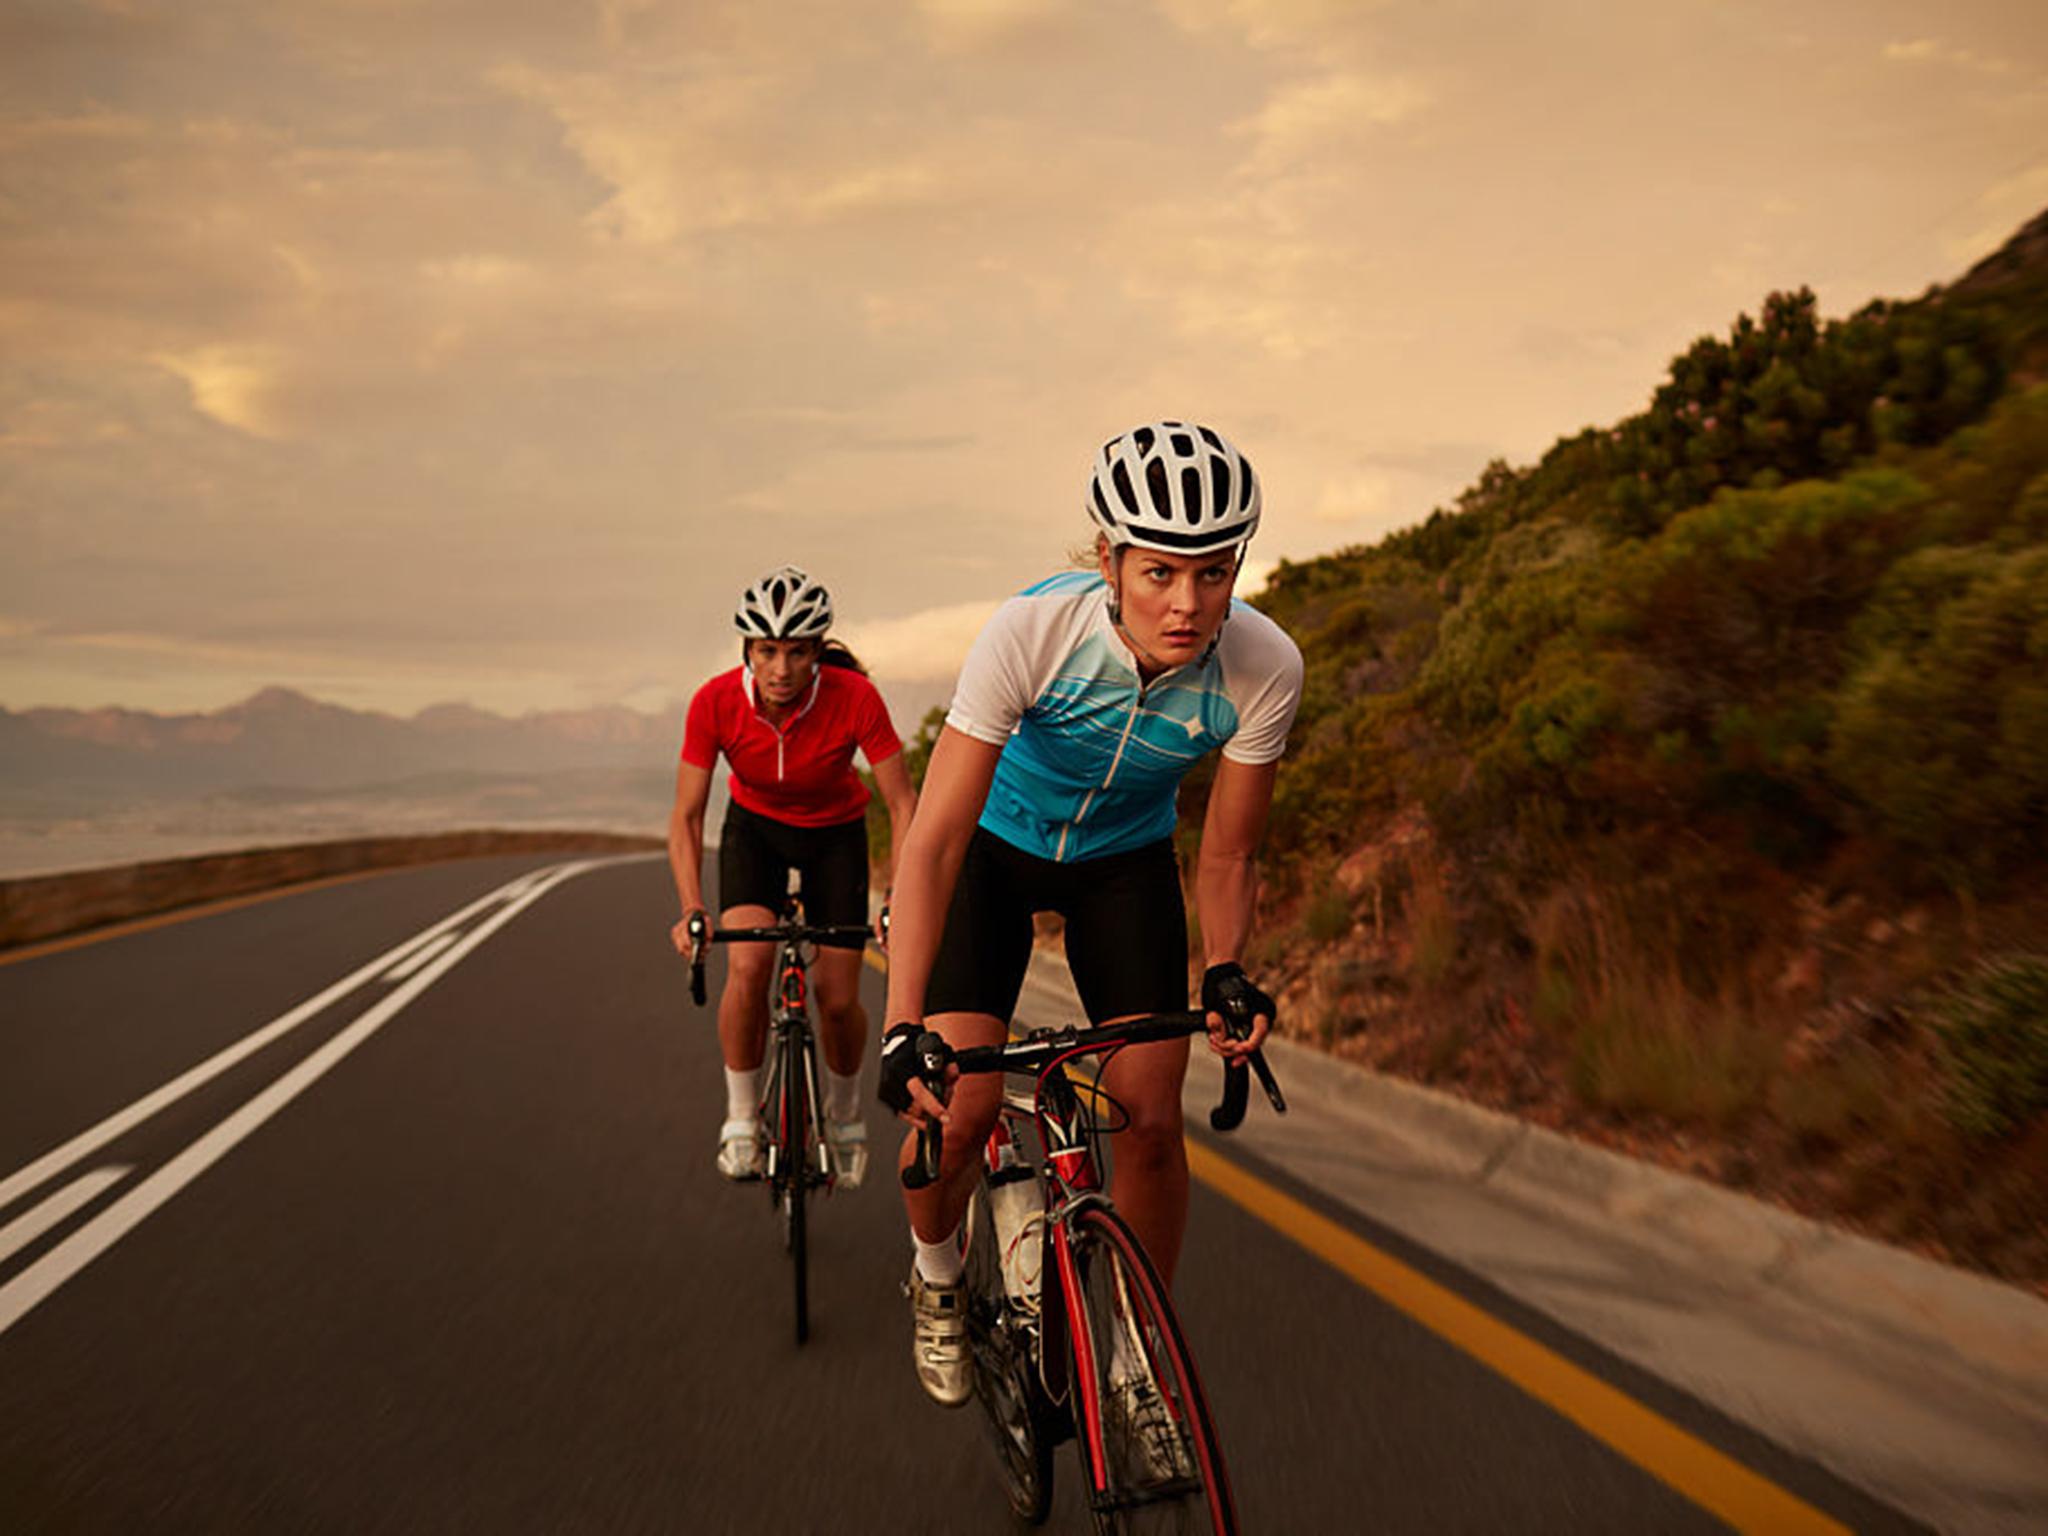 Cyclists who had higher expectations were more relaxed, so had better outcomes